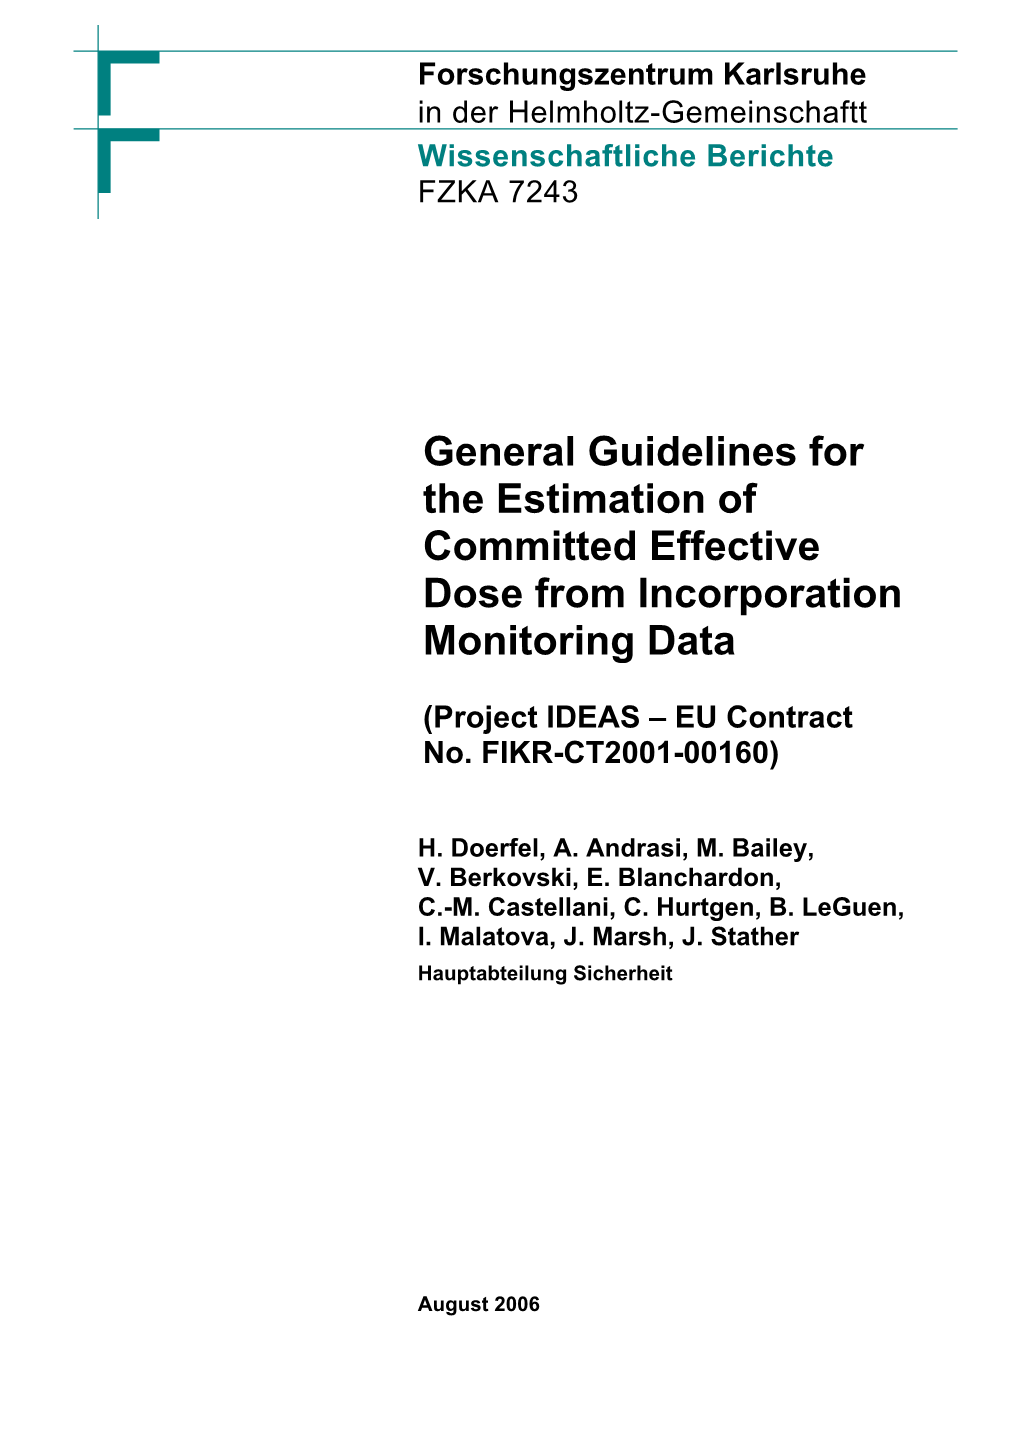 General Guidelines for the Estimation of Committed Effective Dose from Incorporation Monitoring Data